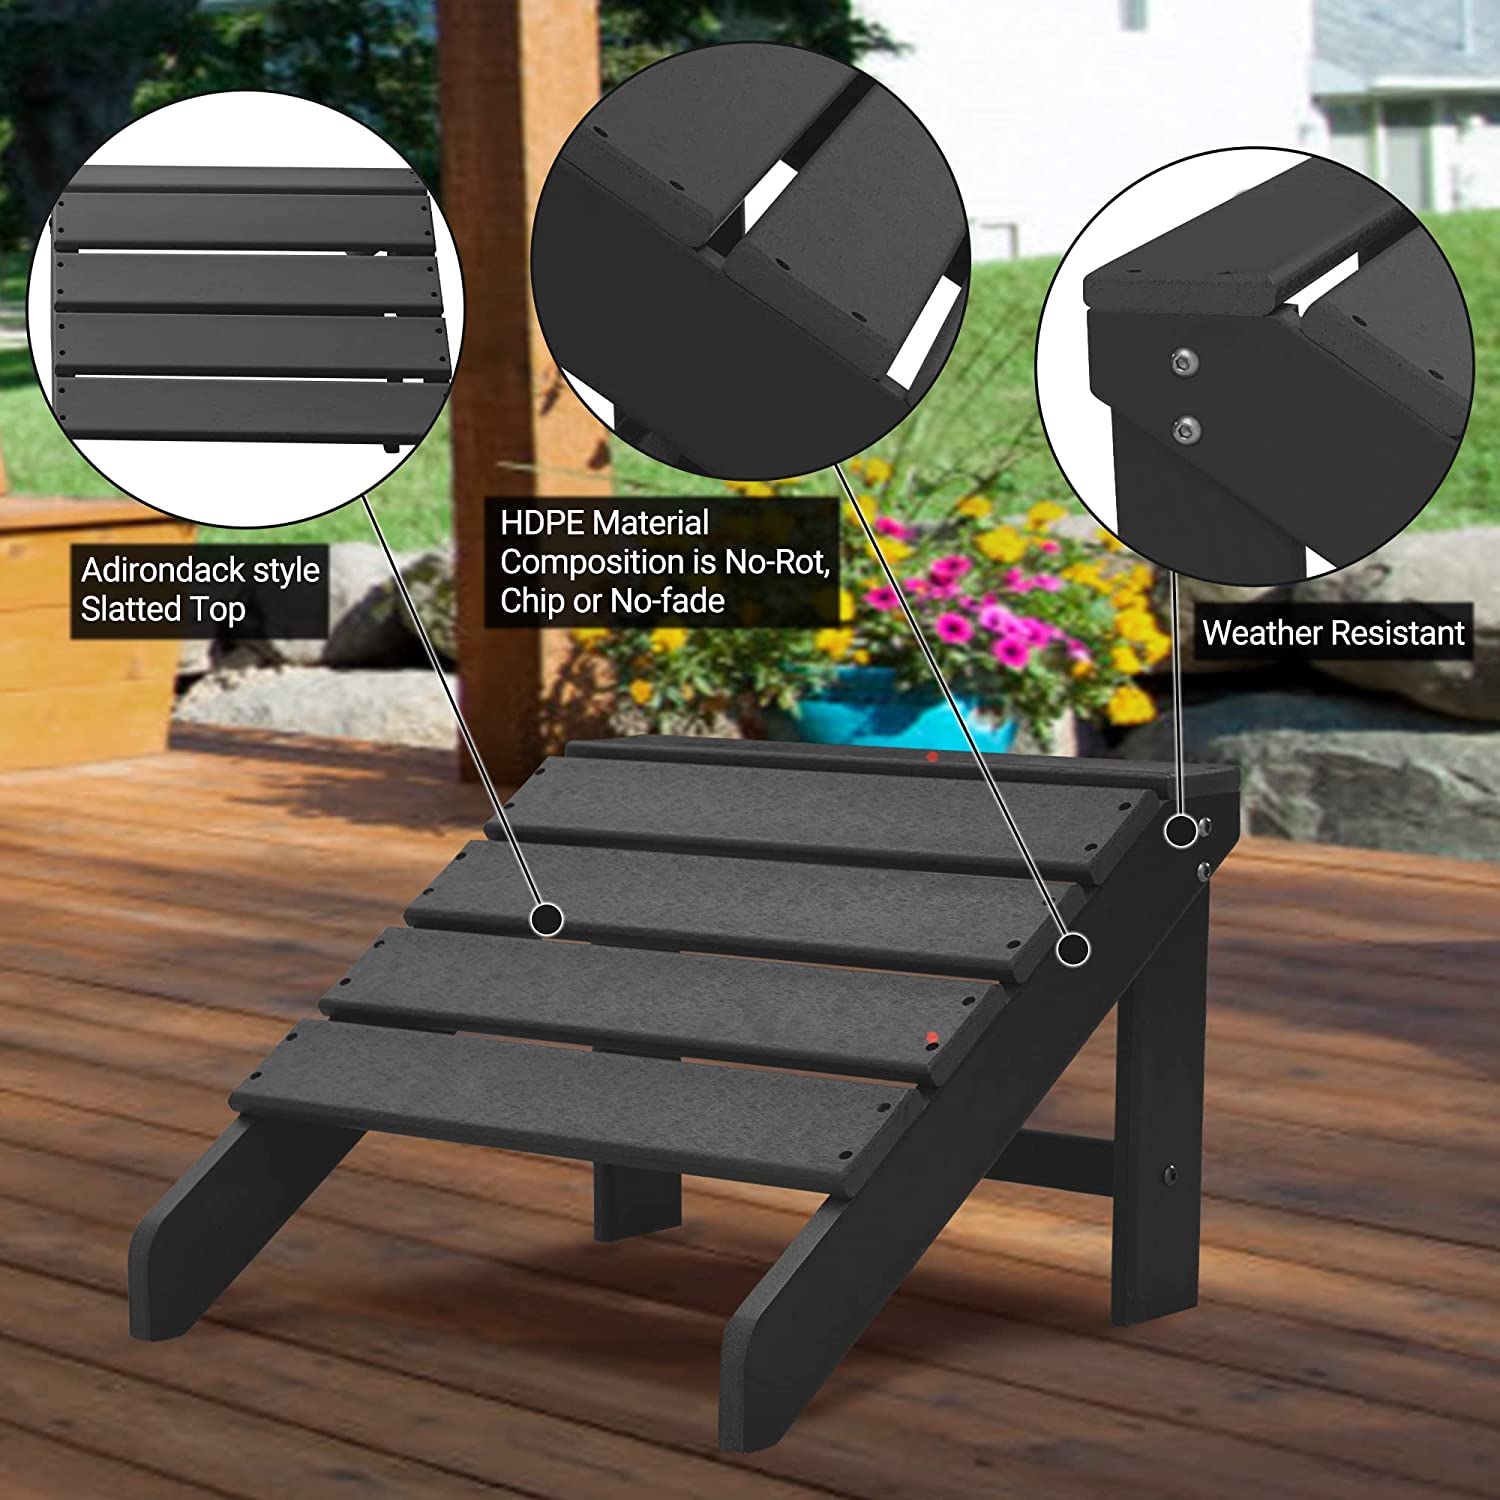 FHFO Adirondack Ottoman and Side Table for Adirondack Chairs, 2 Pieces Outdoor Adirondack Footrest & 1 Piece End Table, Weather Resistant Footstool Table for Adirondack Chair （Black） - image 3 of 5